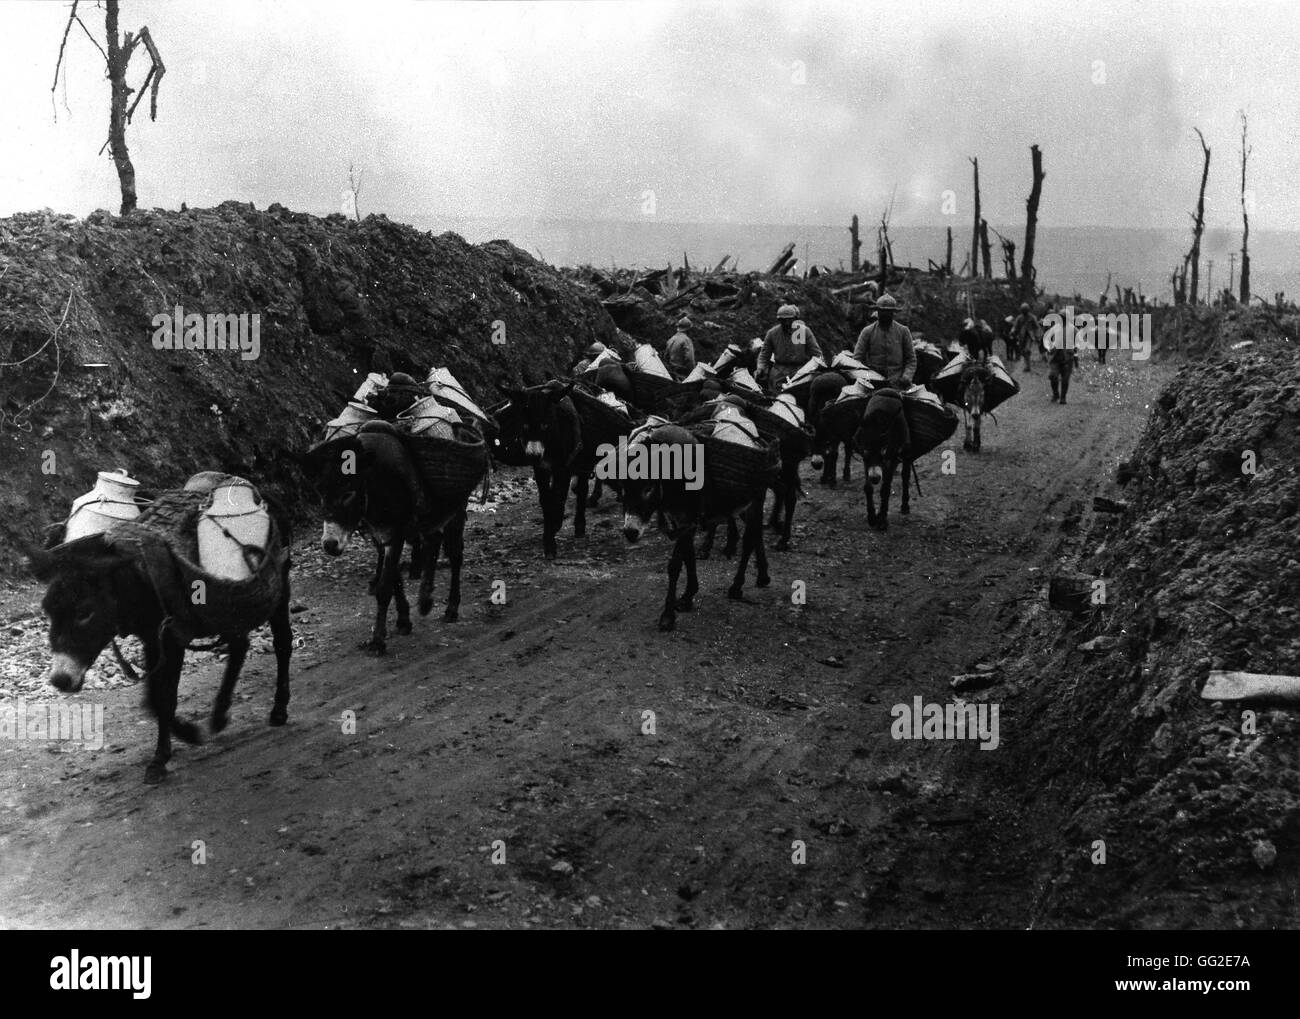 Donkeys bringing food to soldiers in trenches October 17, 1916 France, World War I Musée de Vincennes Stock Photo